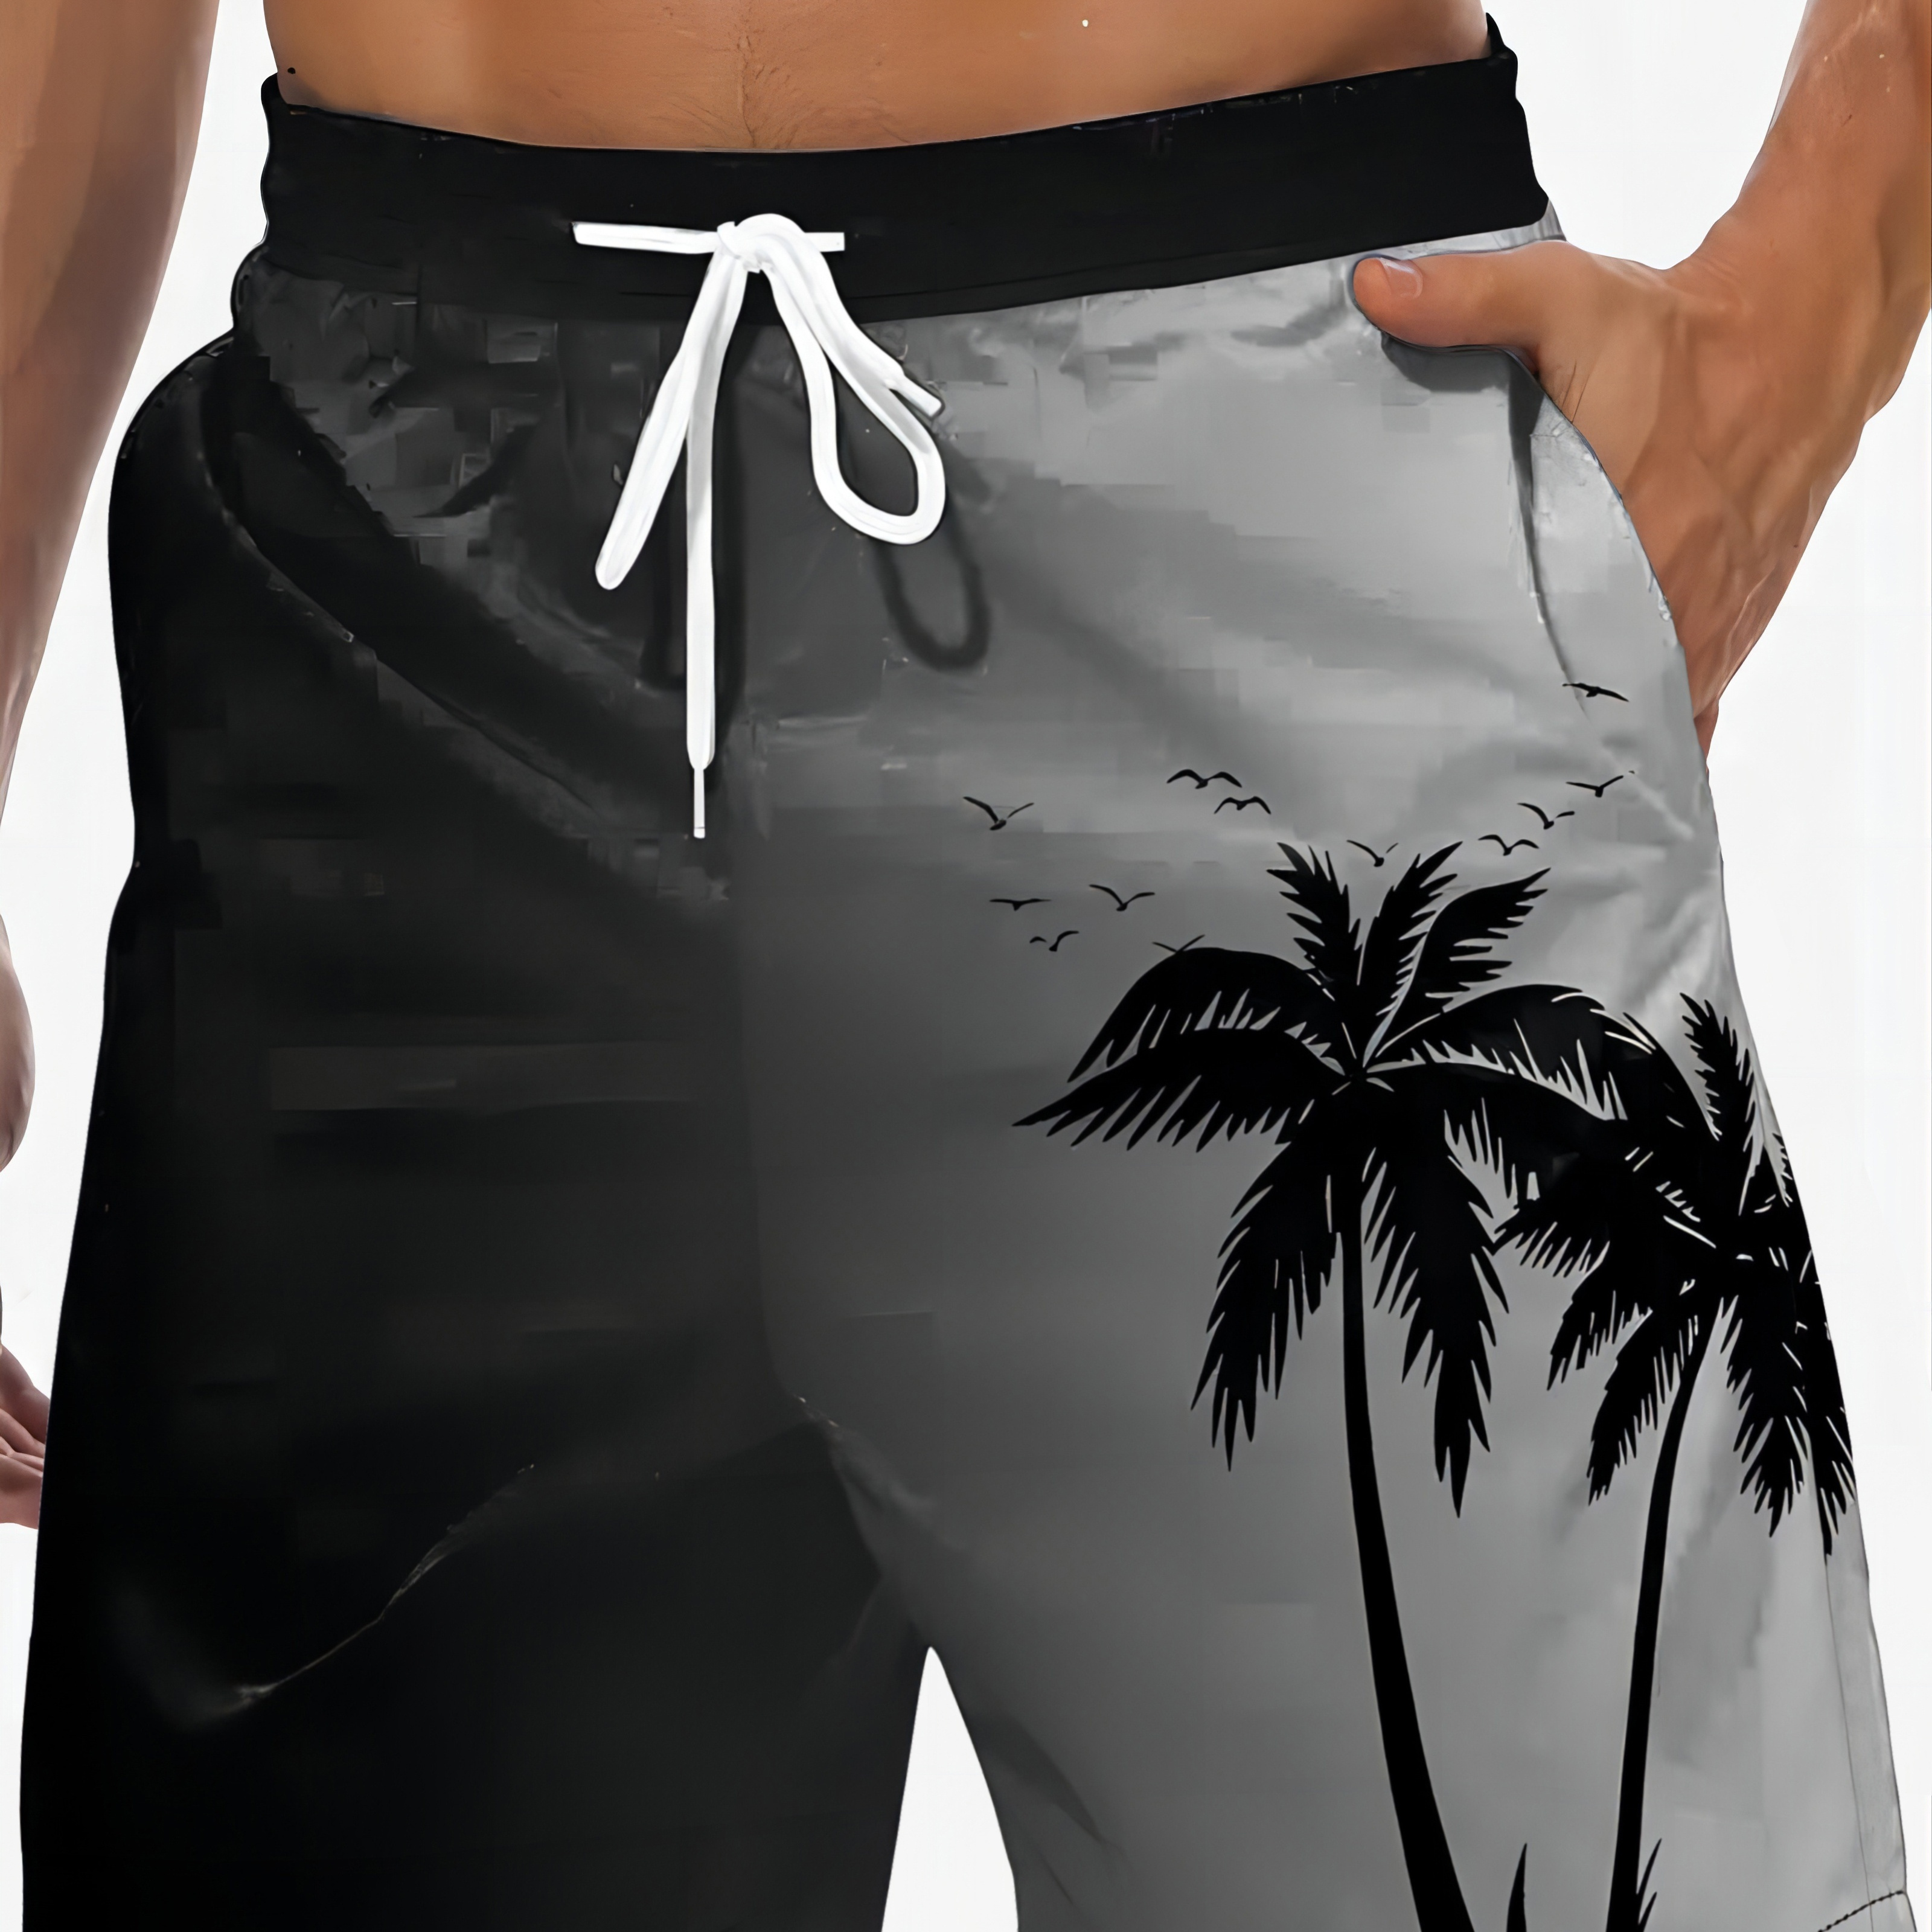 

Gradient Color And Coconut Tree Pattern Shorts With Drawstring And Pockets, Casual And Trendy Shorts For Men's Summer Beach And Sports Wear